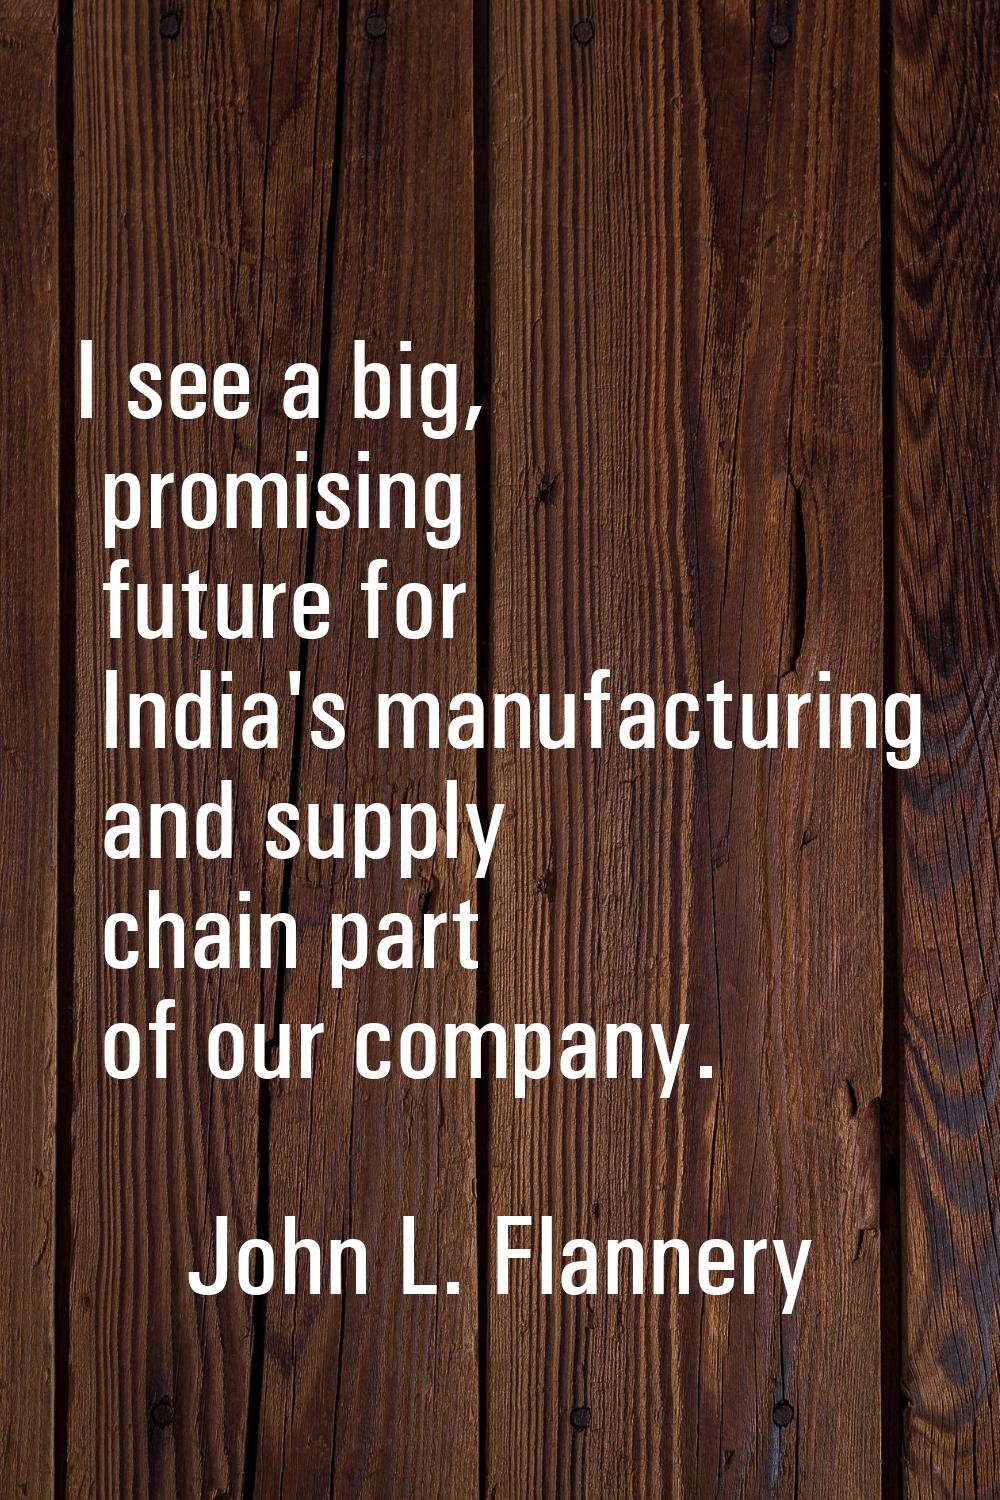 I see a big, promising future for India's manufacturing and supply chain part of our company.